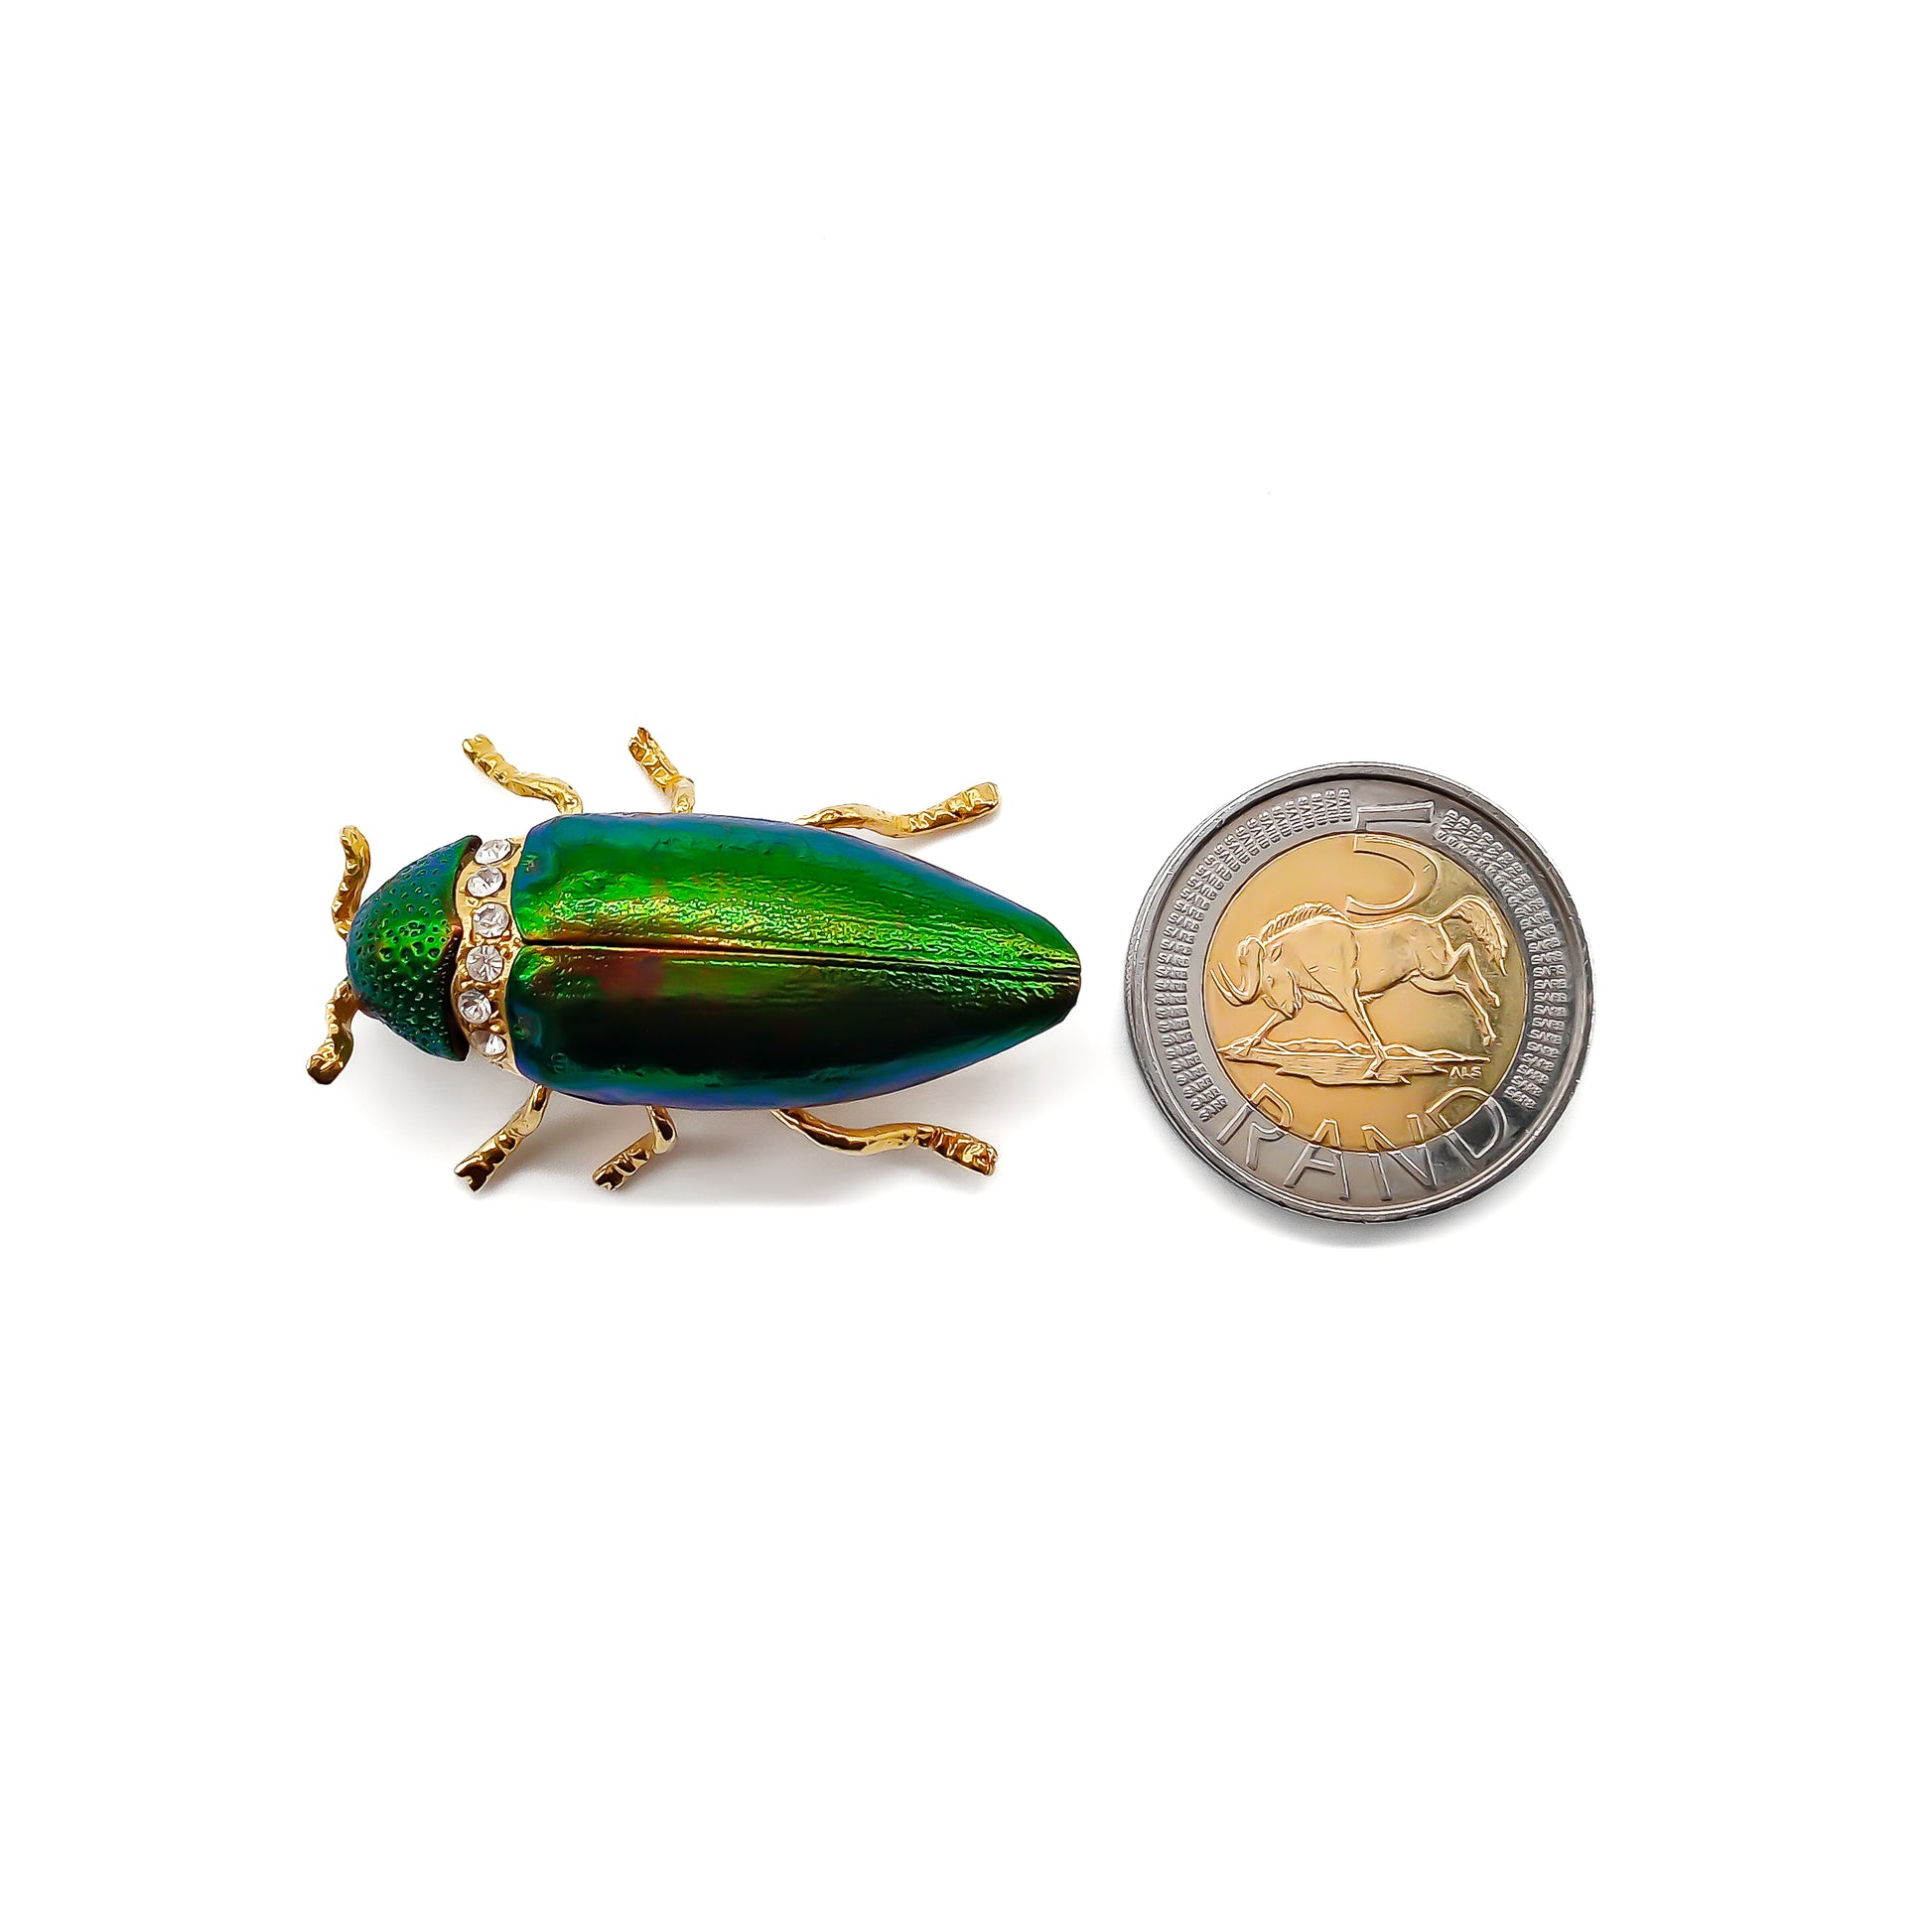 Stunning brooch made from a real iridescent green jewel beetle and added pastes in a gilt setting. 